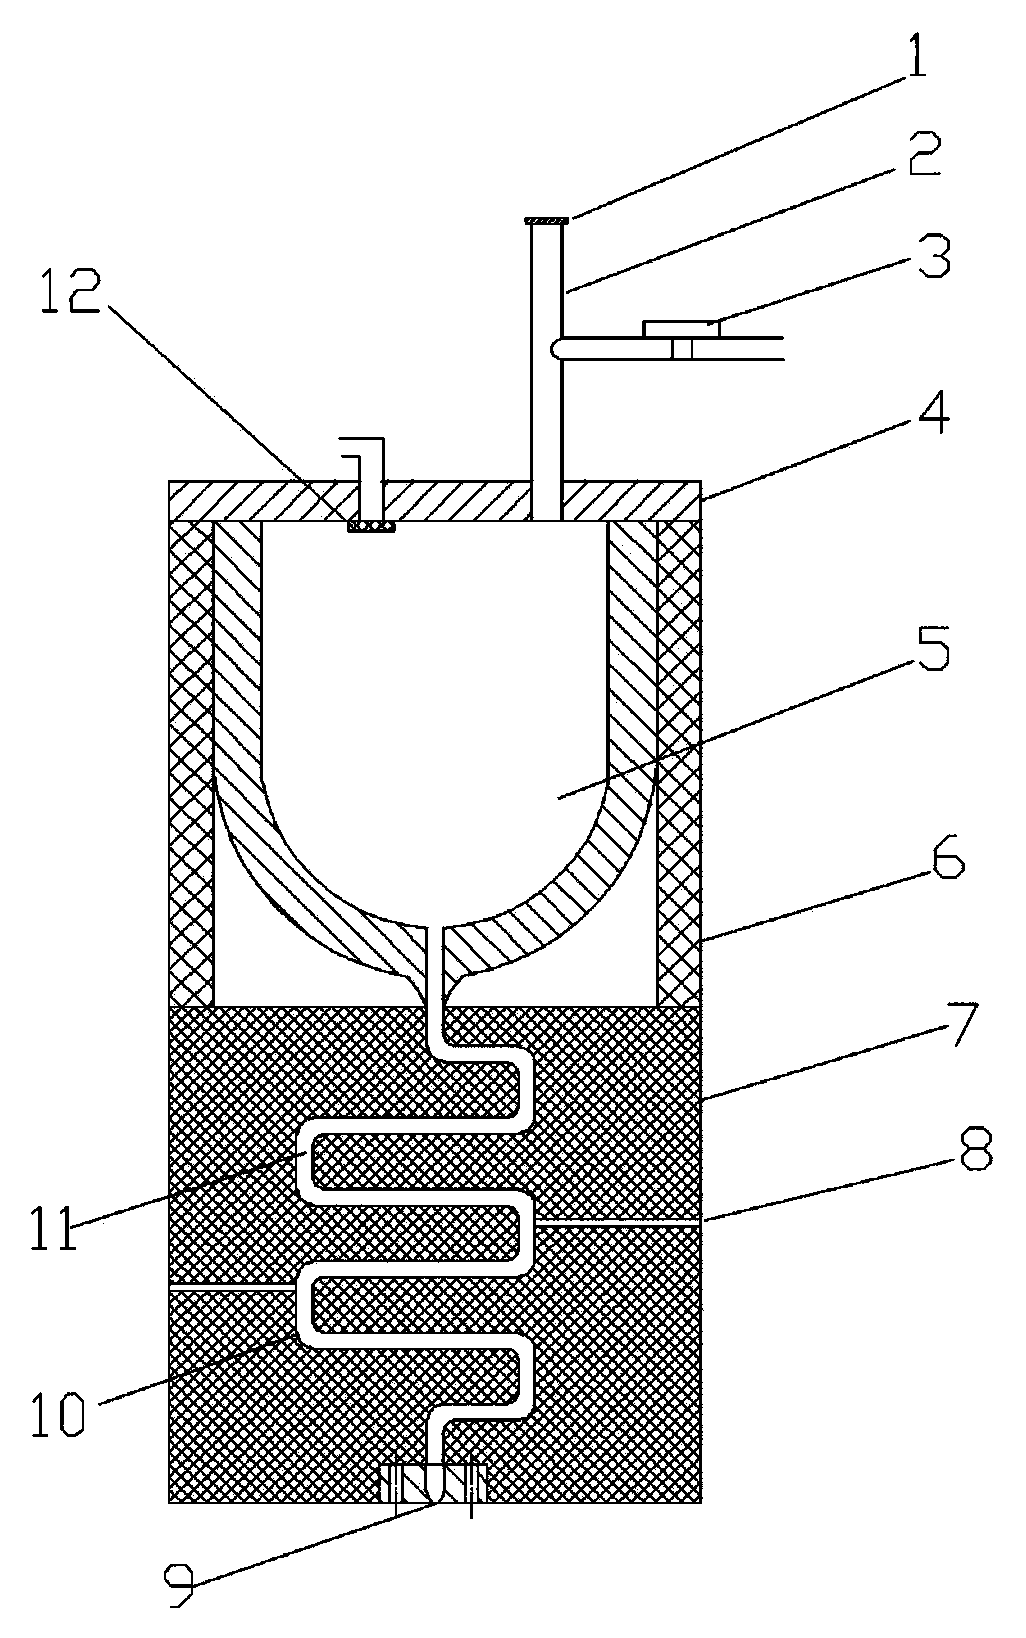 S-shaped channel solder ejecting head driven by ampere force